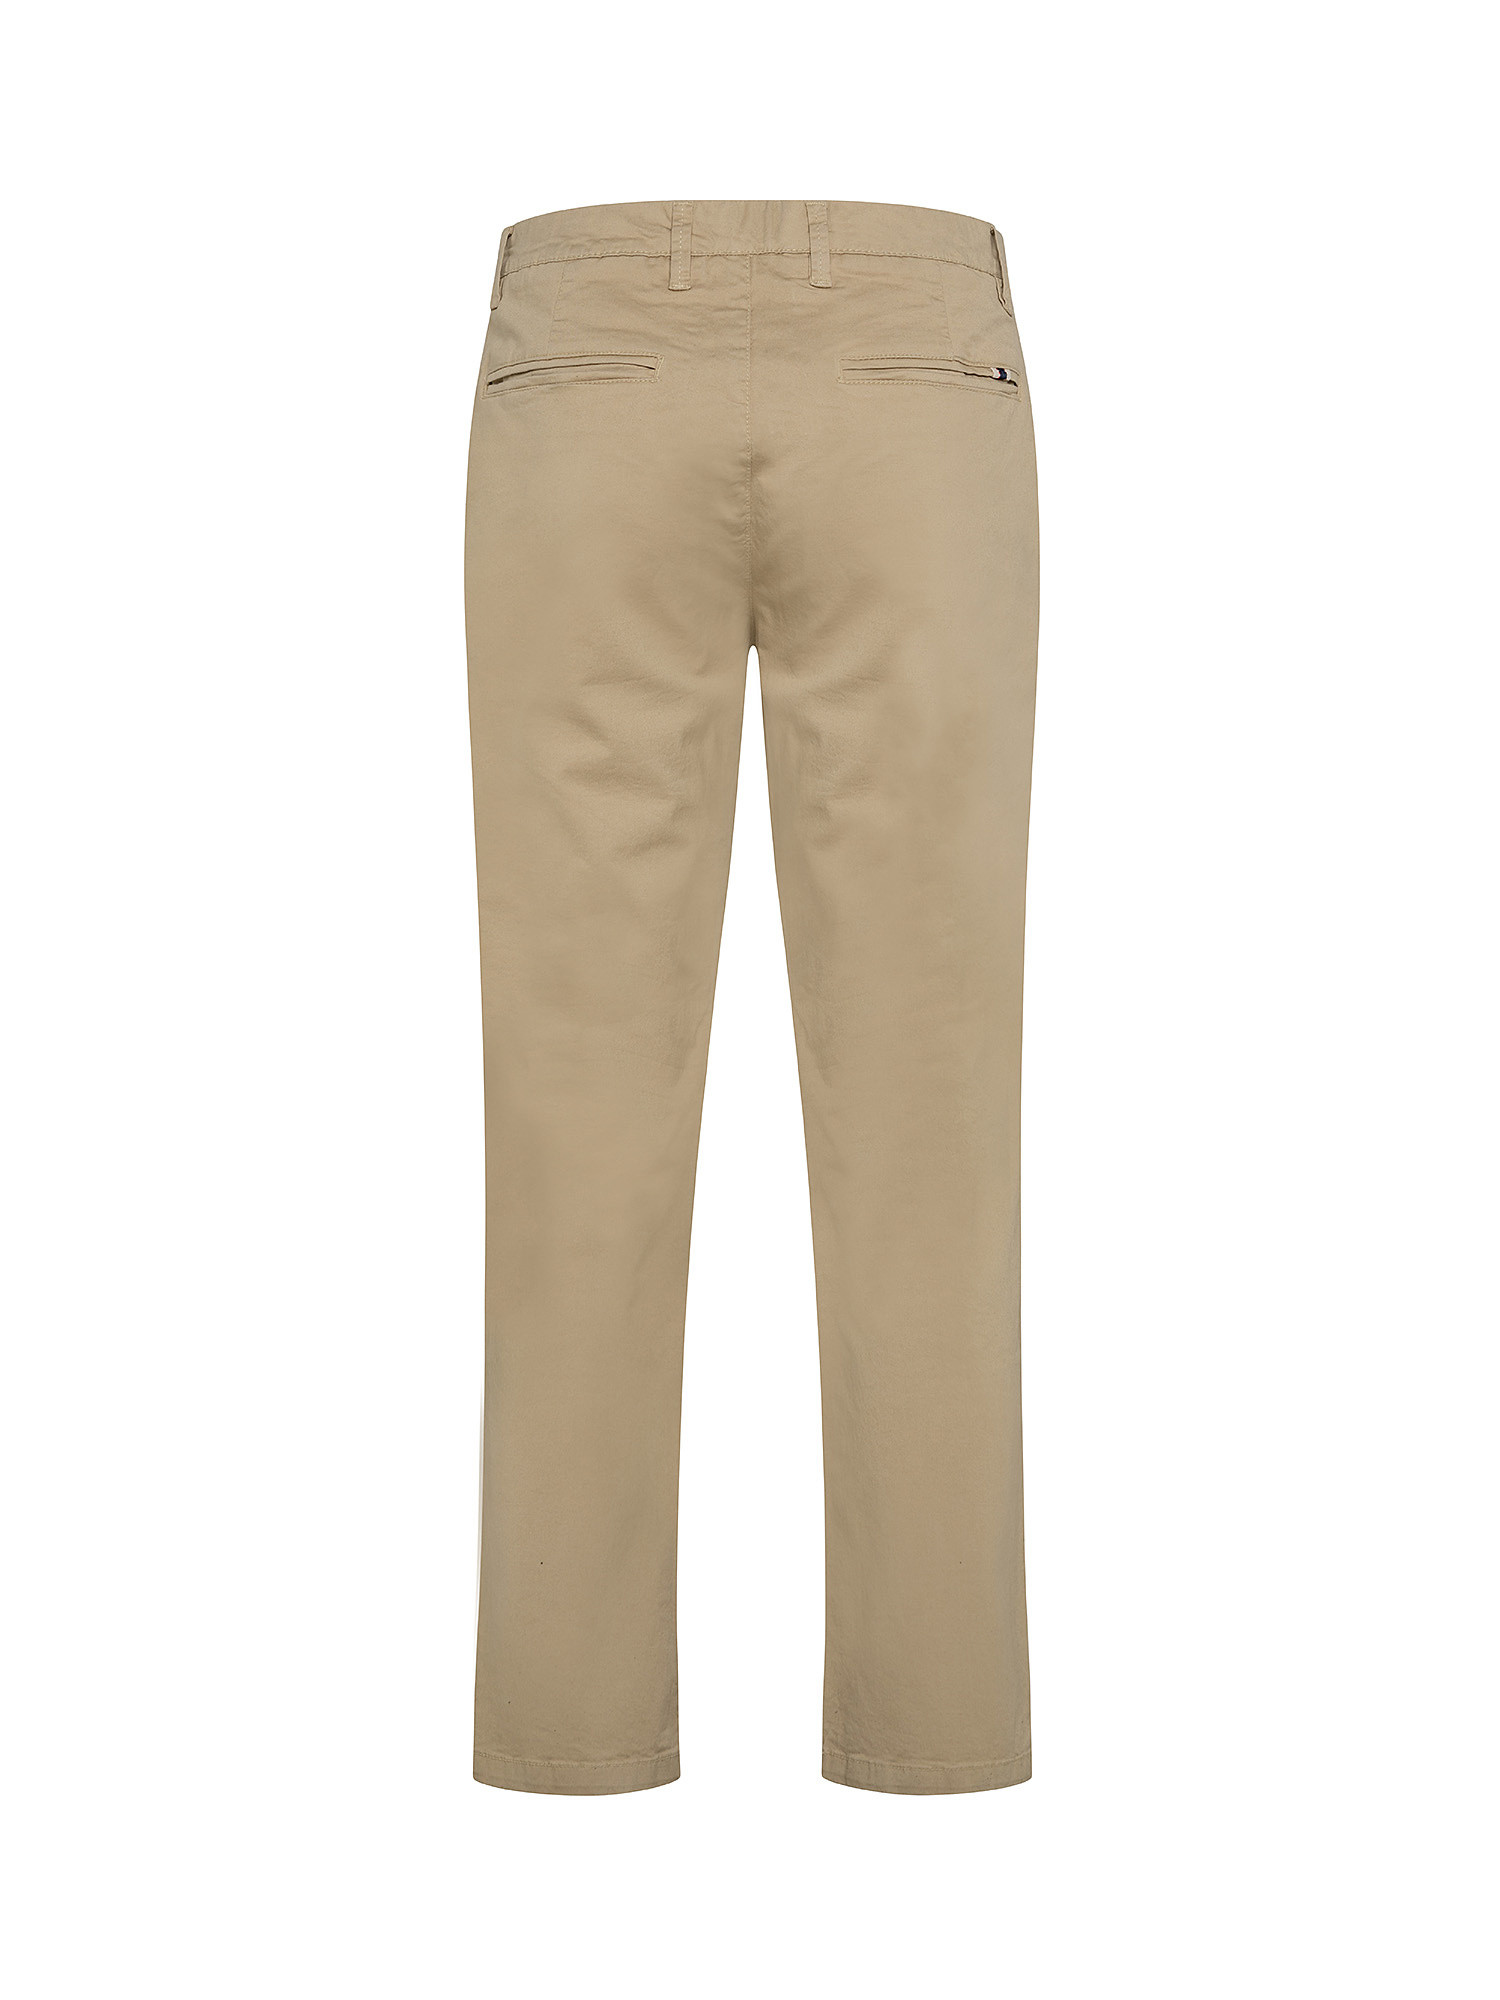 Pantalone chinos cotone stretch, Beige, large image number 1